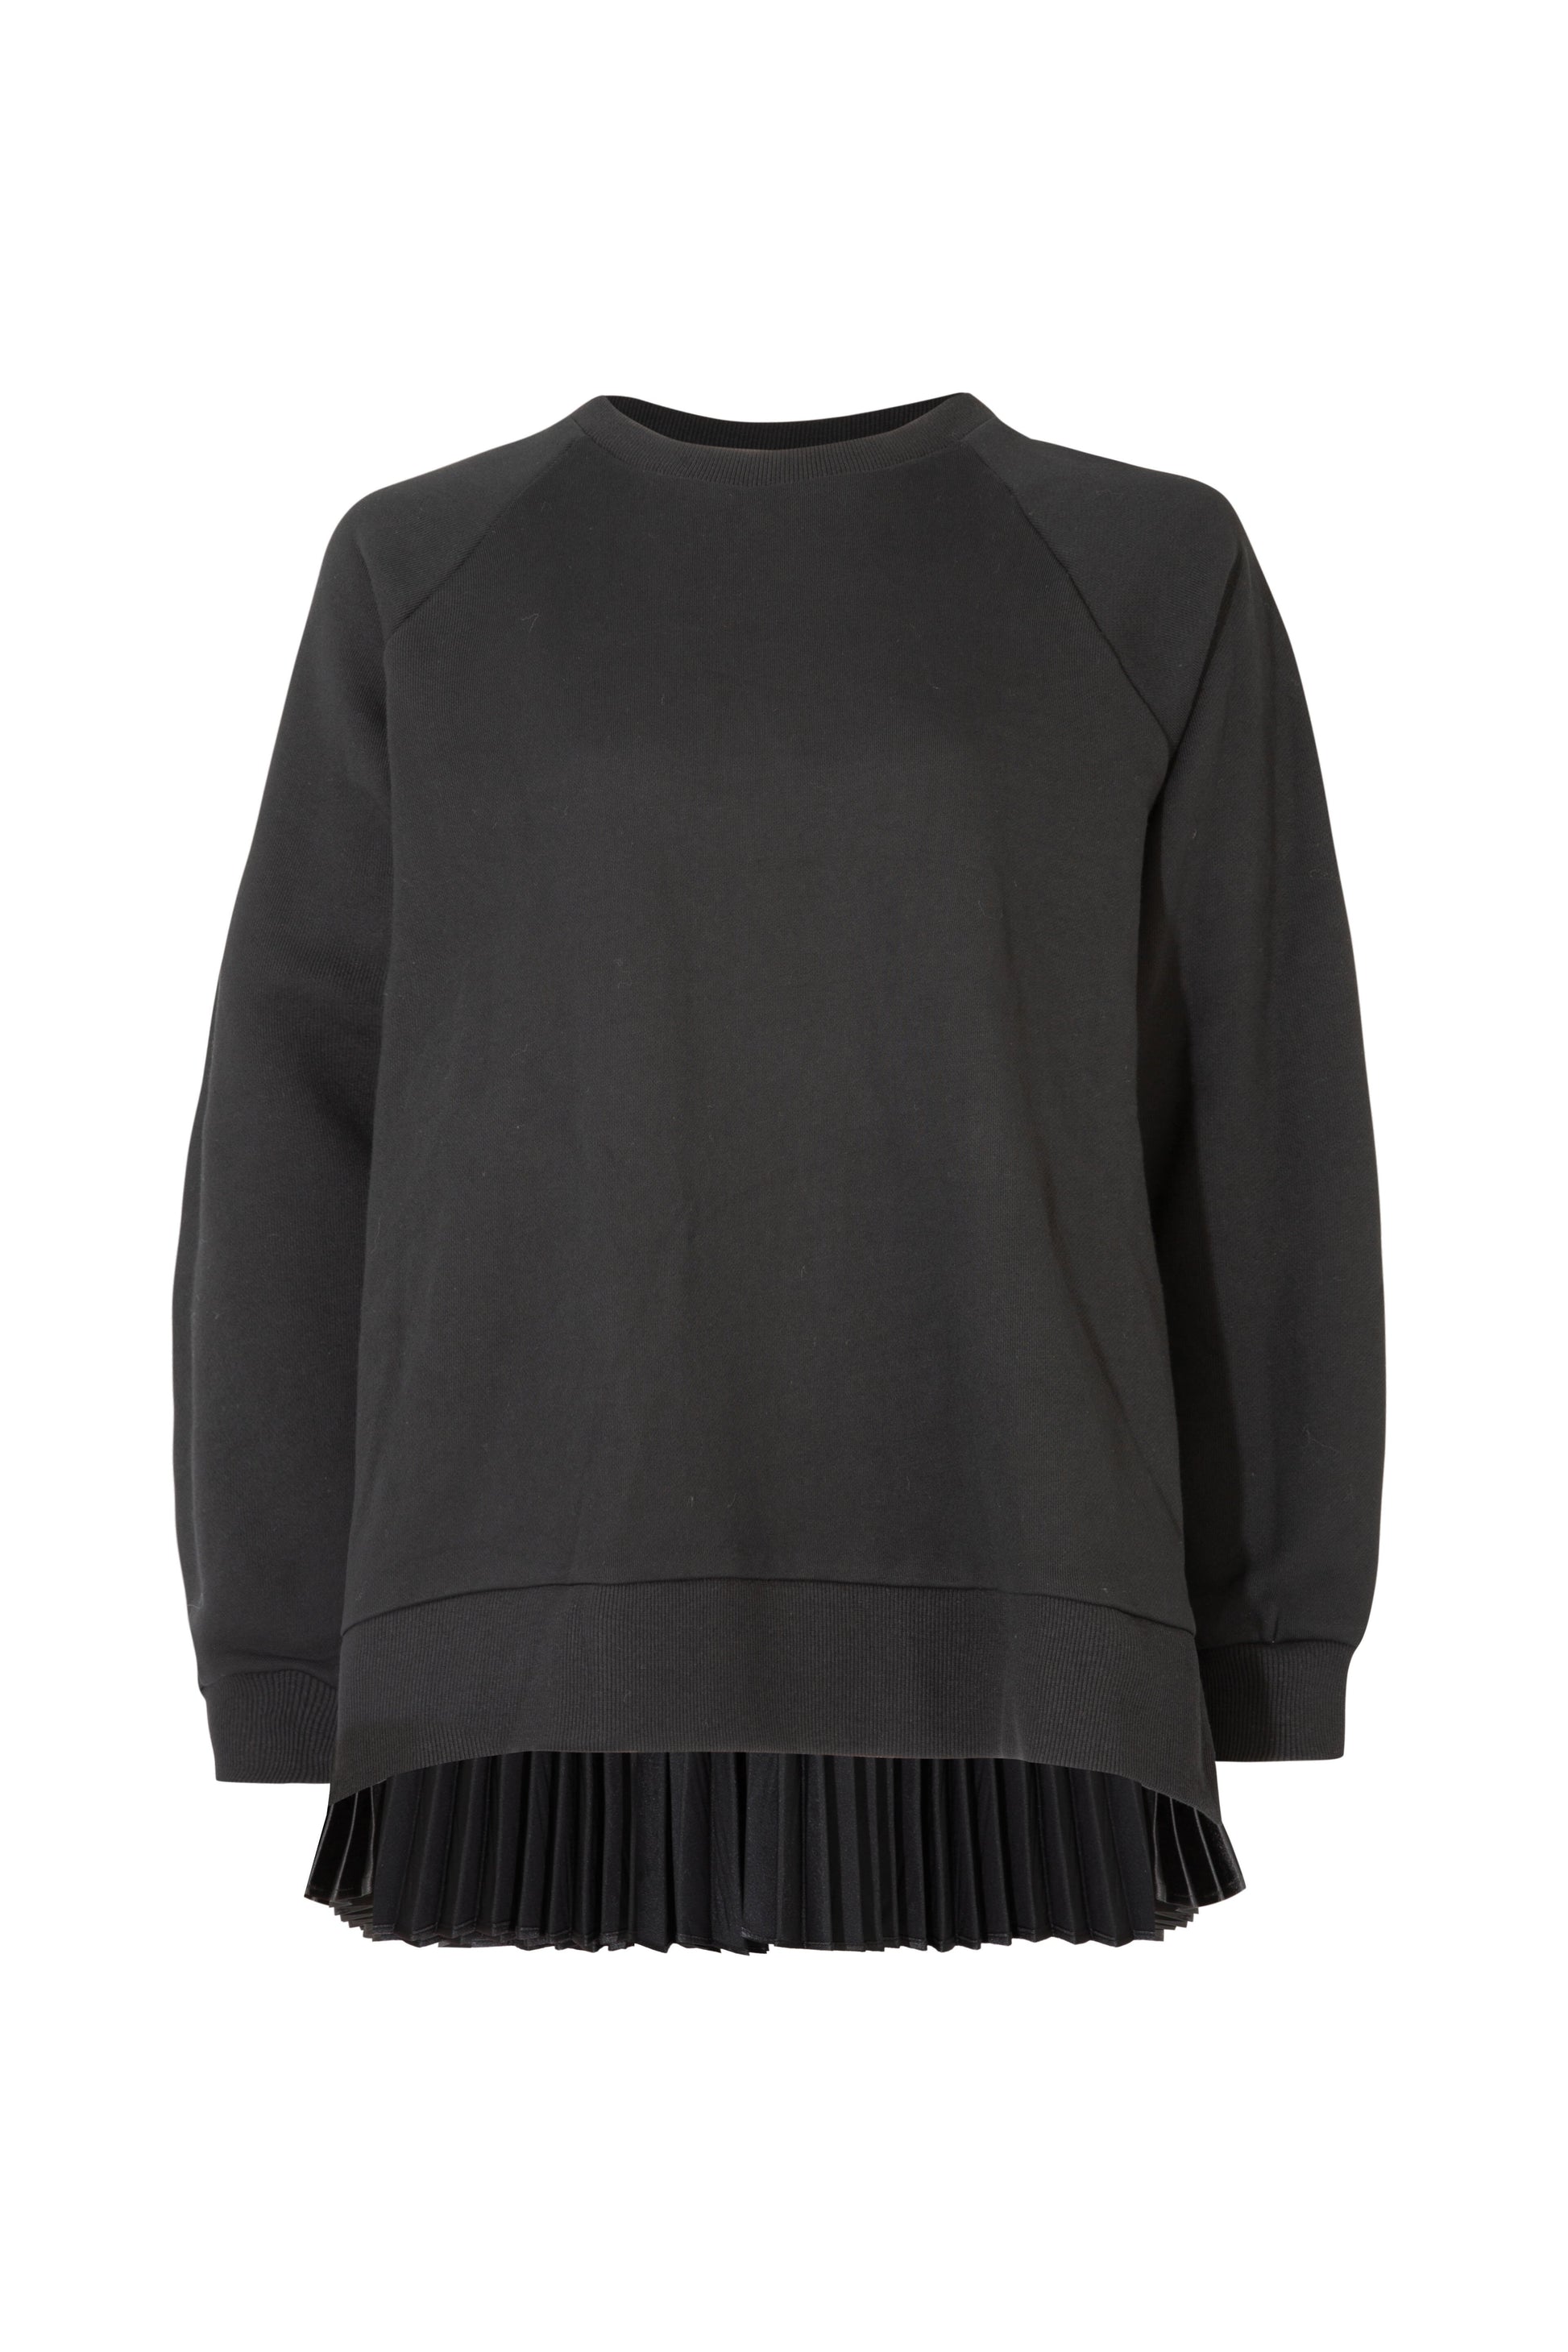 CURATE PLEATS MEET TOP - BLACK - THE VOGUE STORE